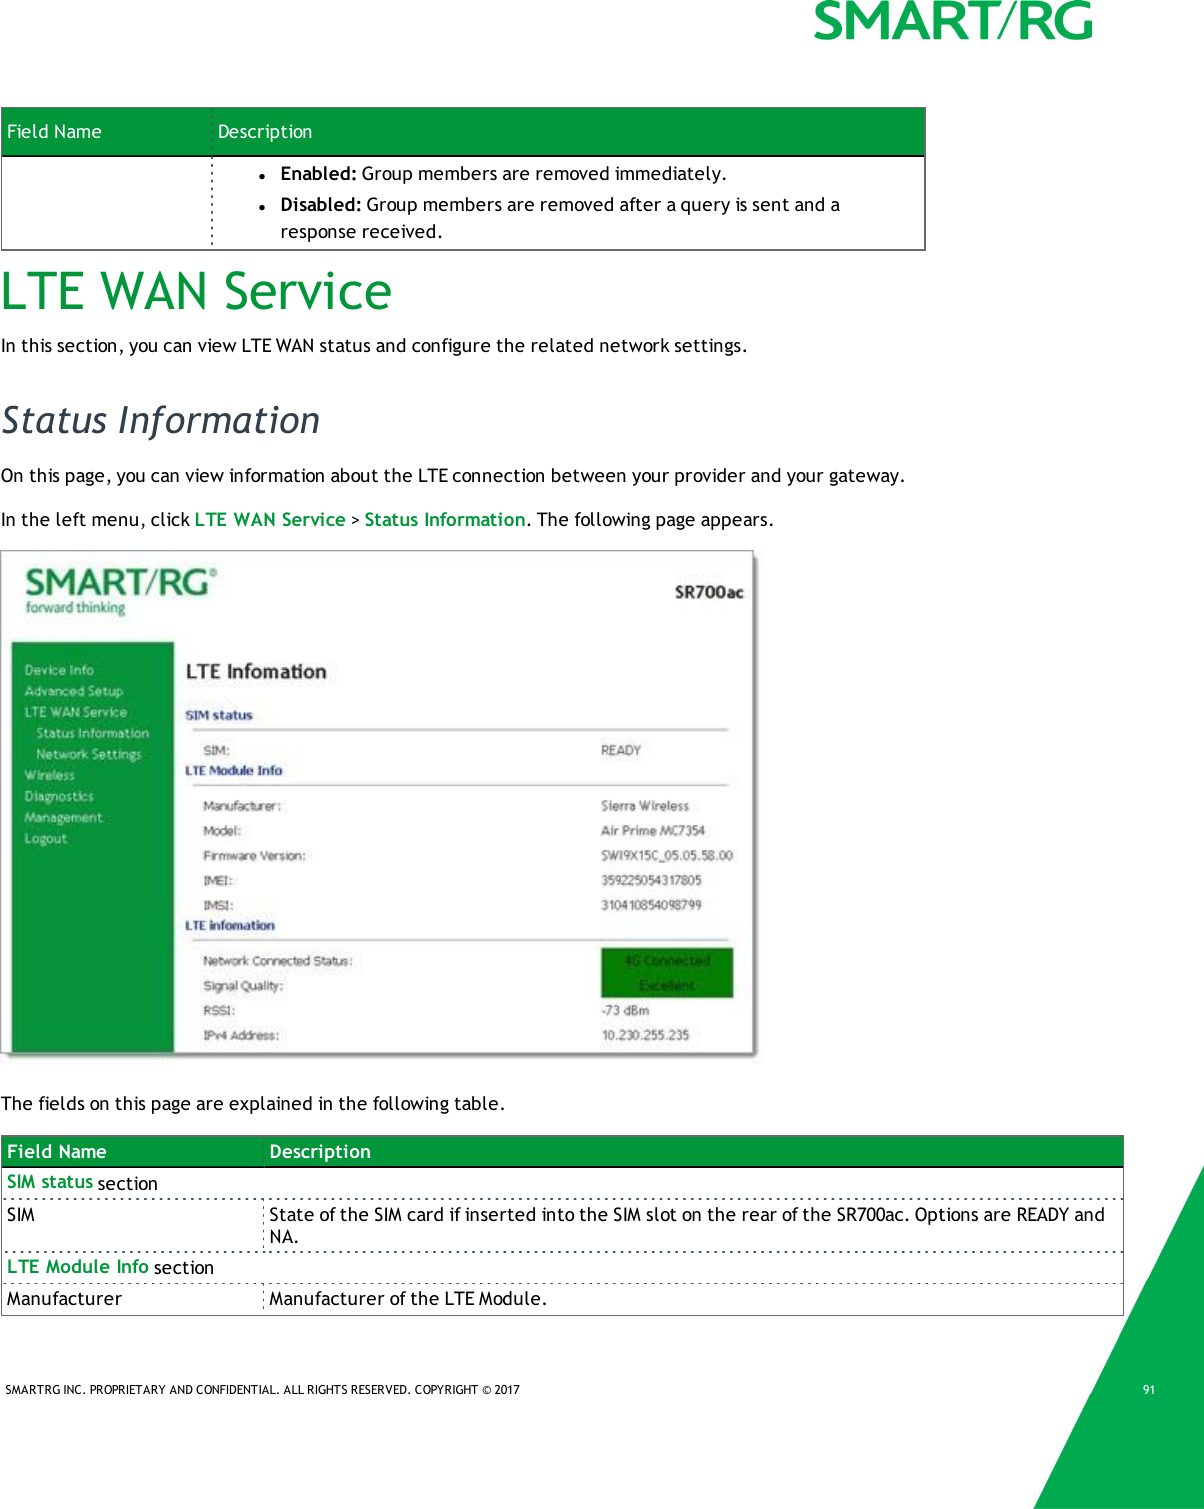 SMARTRG INC. PROPRIETARY AND CONFIDENTIAL. ALL RIGHTS RESERVED. COPYRIGHT © 2017 91Field Name DescriptionlEnabled: Group members are removed immediately.lDisabled: Group members are removed after a query is sent and aresponse received.LTE WAN ServiceIn this section, you can view LTE WAN status and configure the related network settings.Status InformationOn this page, you can view information about the LTE connection between your provider and your gateway.In the left menu, click LTE WAN Service &gt;Status Information. The following page appears.The fields on this page are explained in the following table.Field Name DescriptionSIM status sectionSIM State of the SIM card if inserted into the SIM slot on the rear of the SR700ac. Options are READY andNA.LTE Module Info sectionManufacturer Manufacturer of the LTE Module.